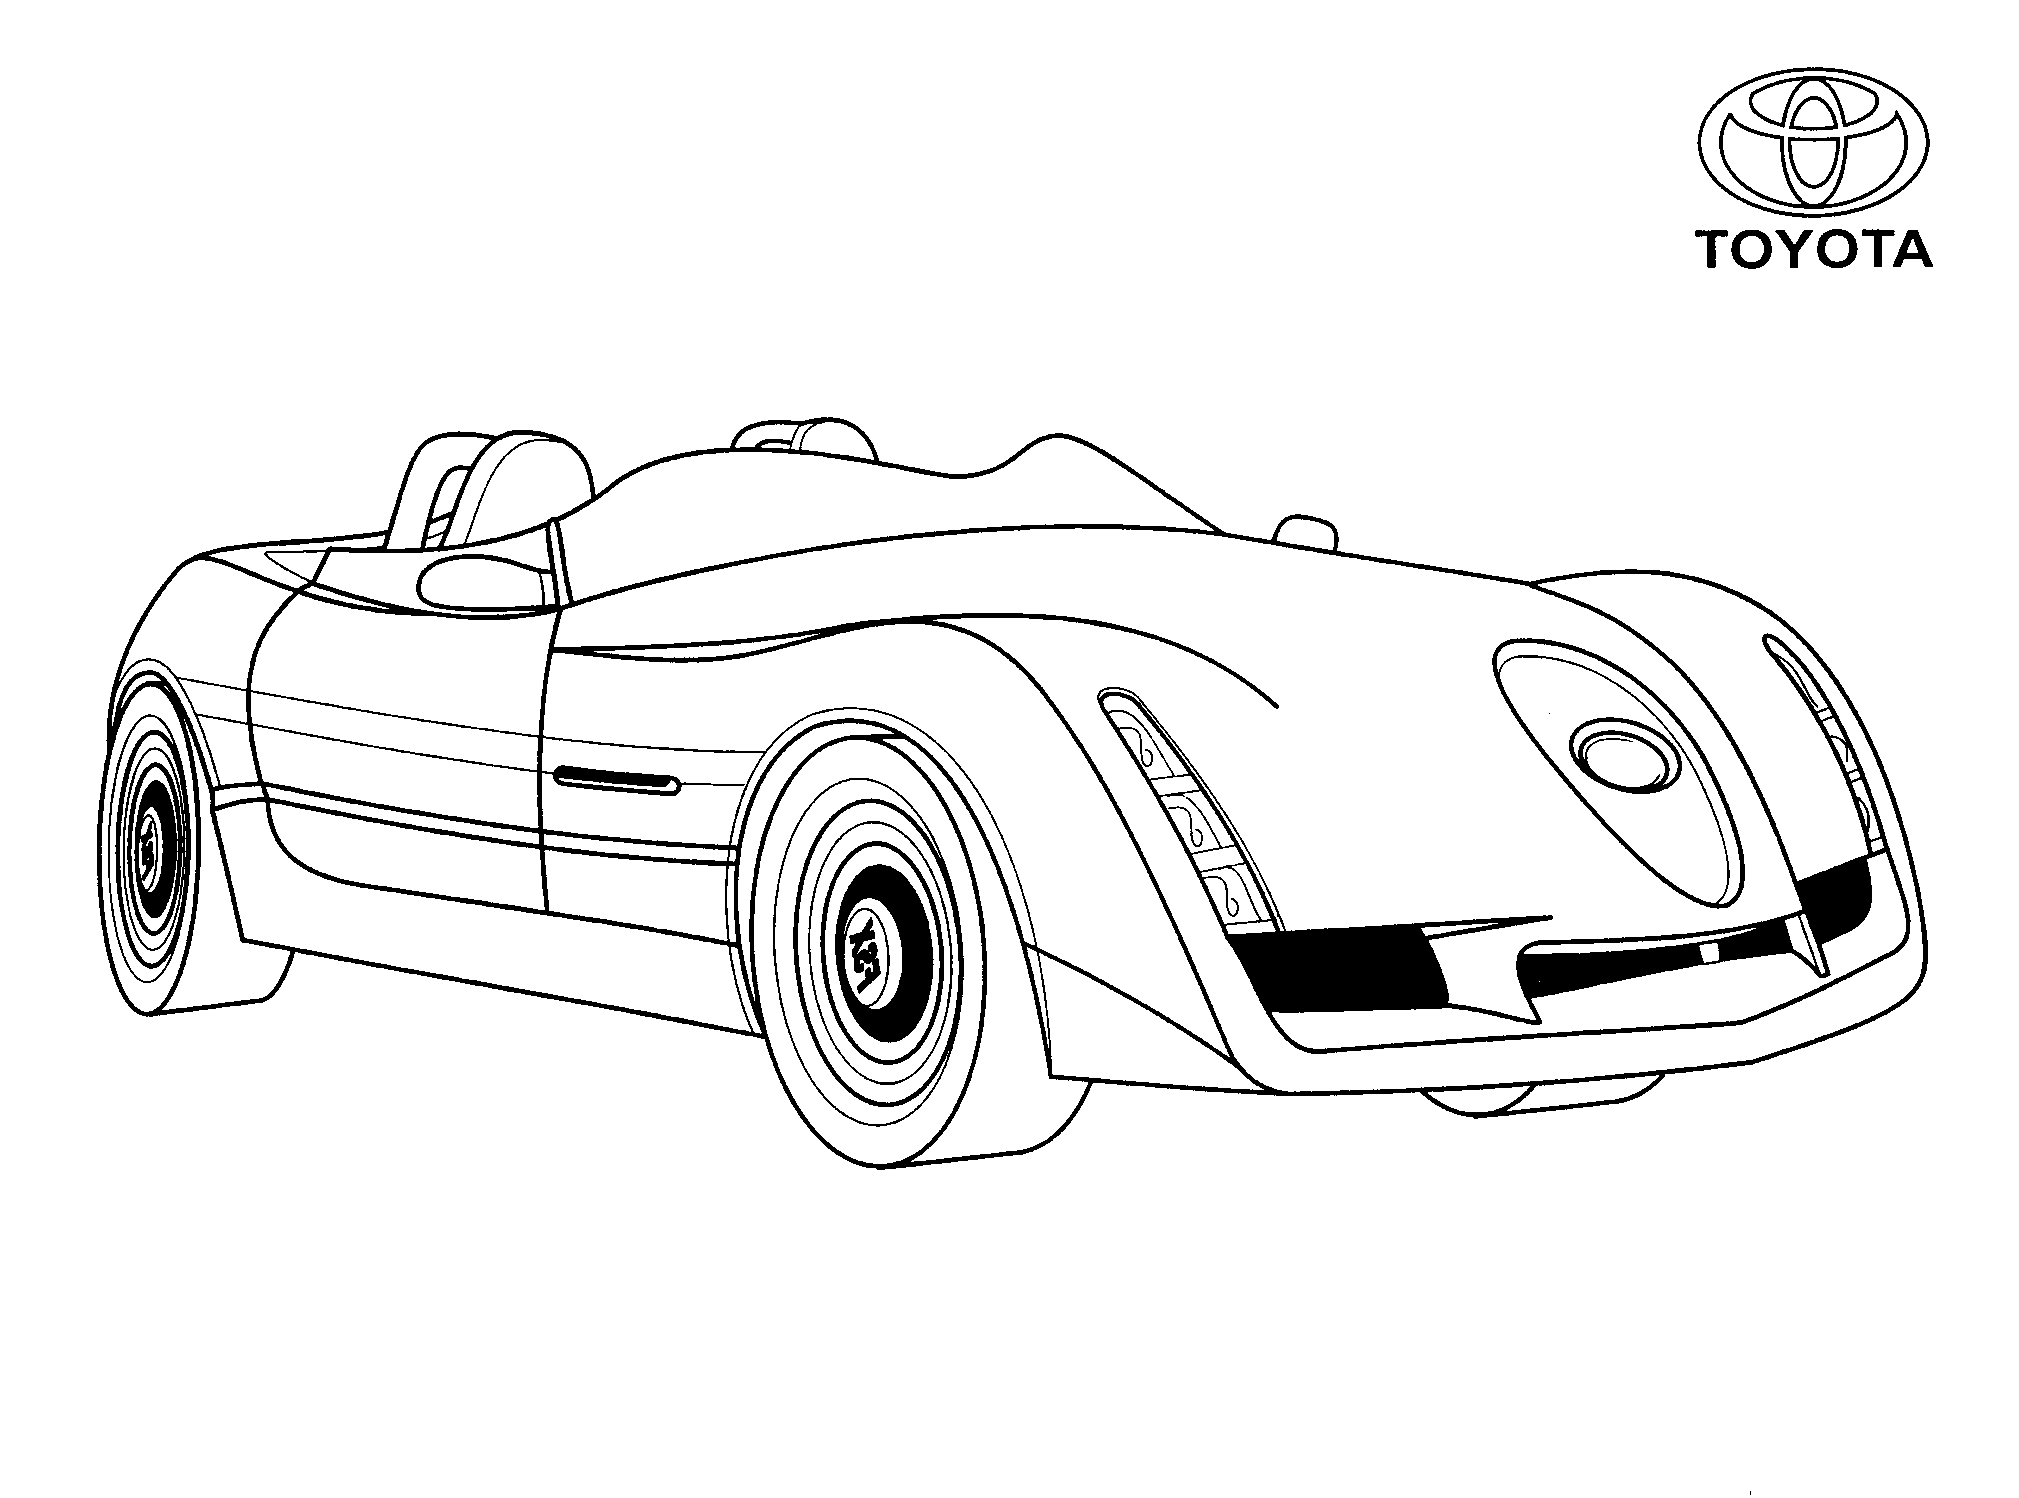 Coloring page - Toyota (Japan)